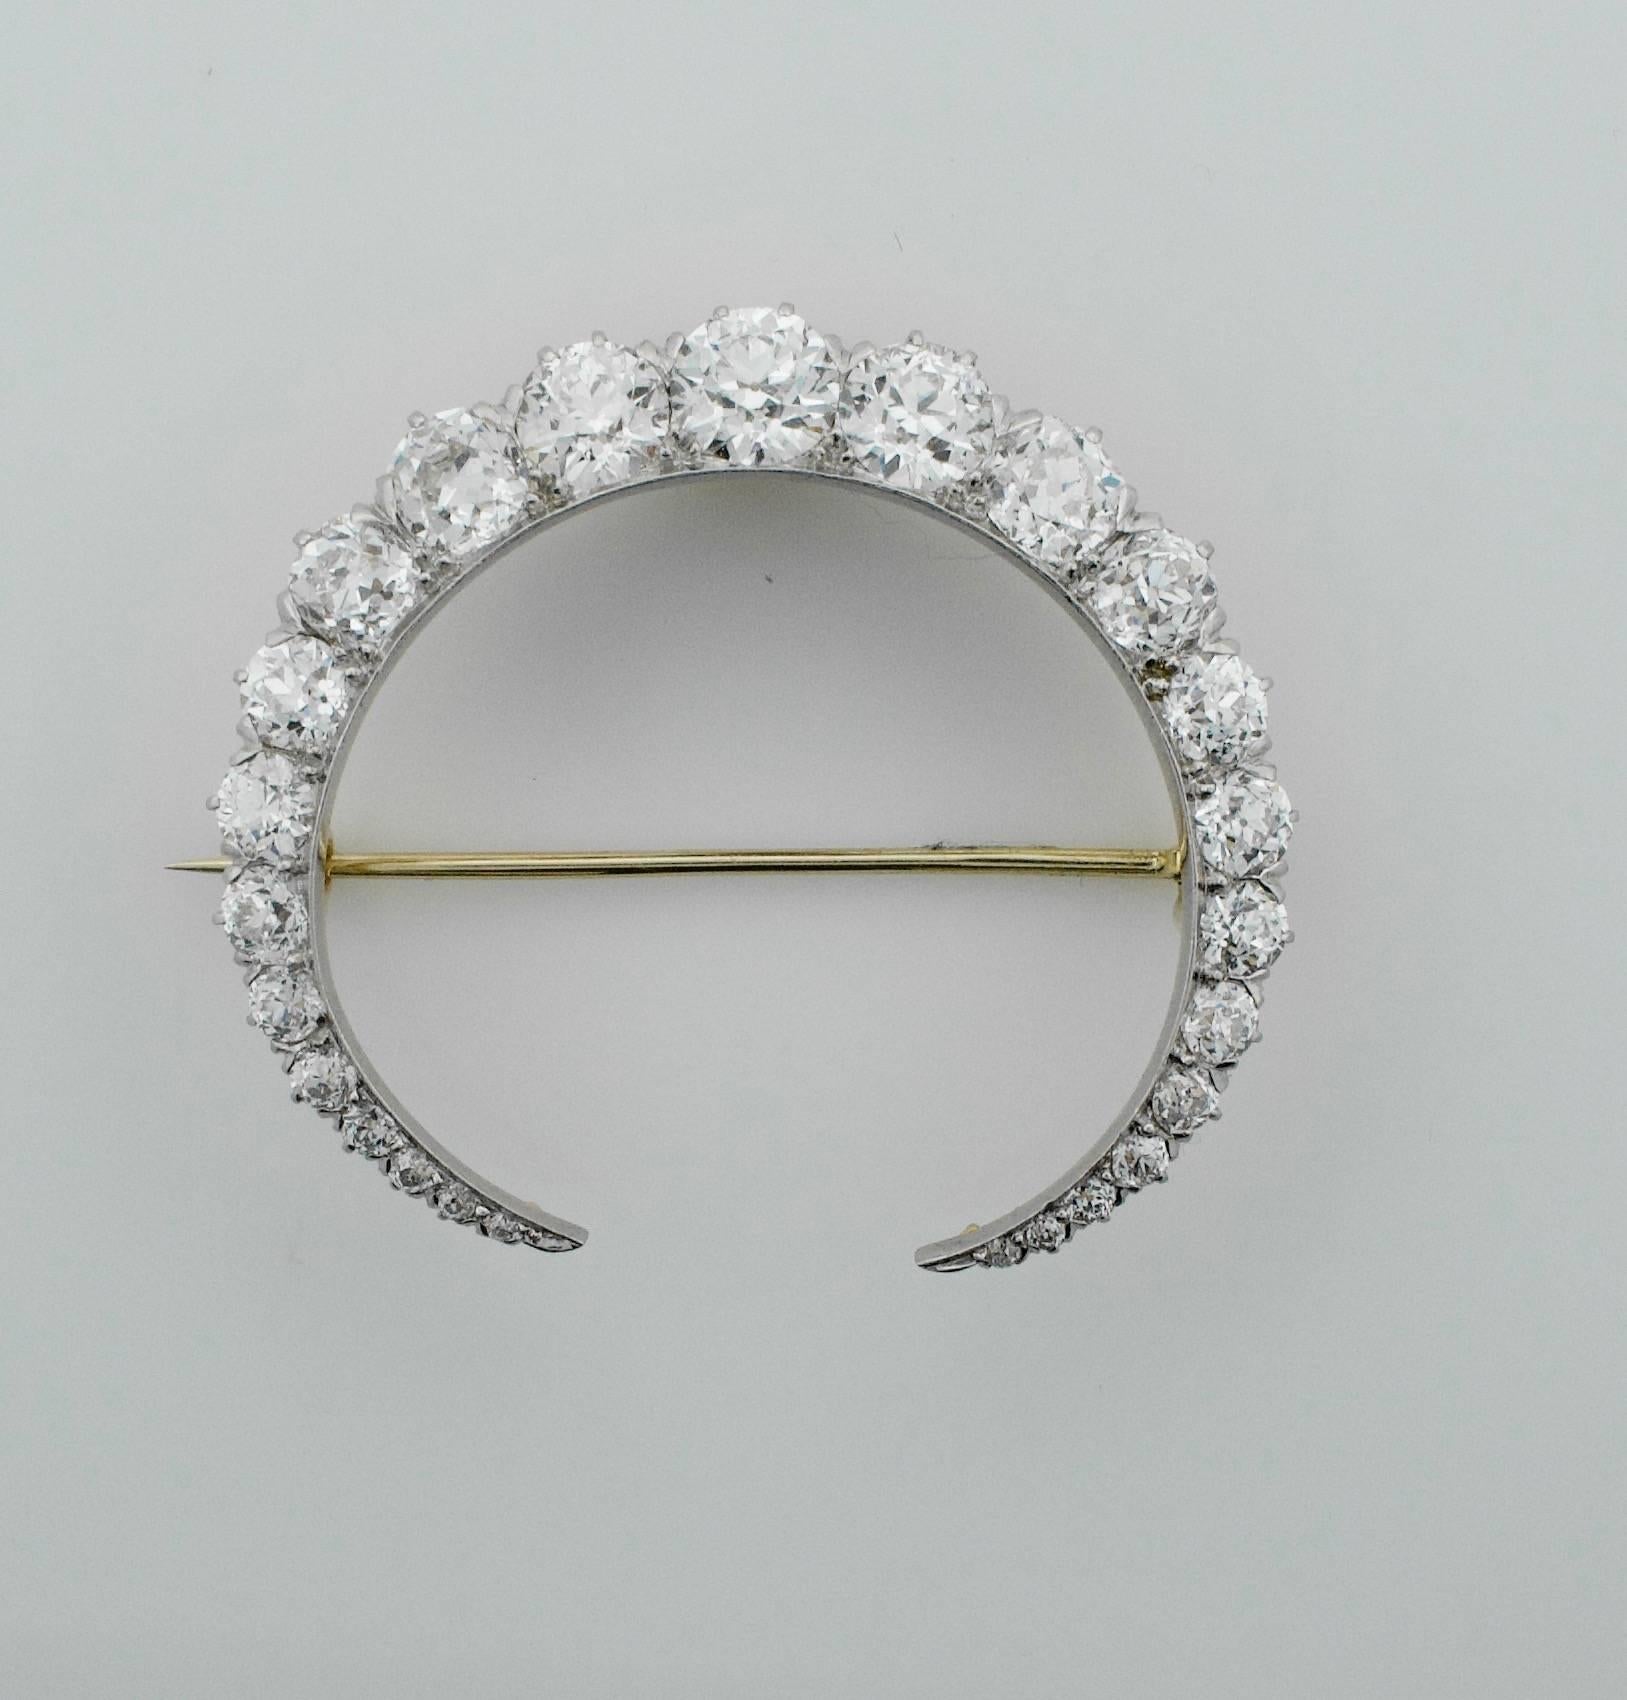 Women's or Men's Tiffany and Co. Diamond Crescent Necklace/Brooch in Yellow Gold, circa 1900